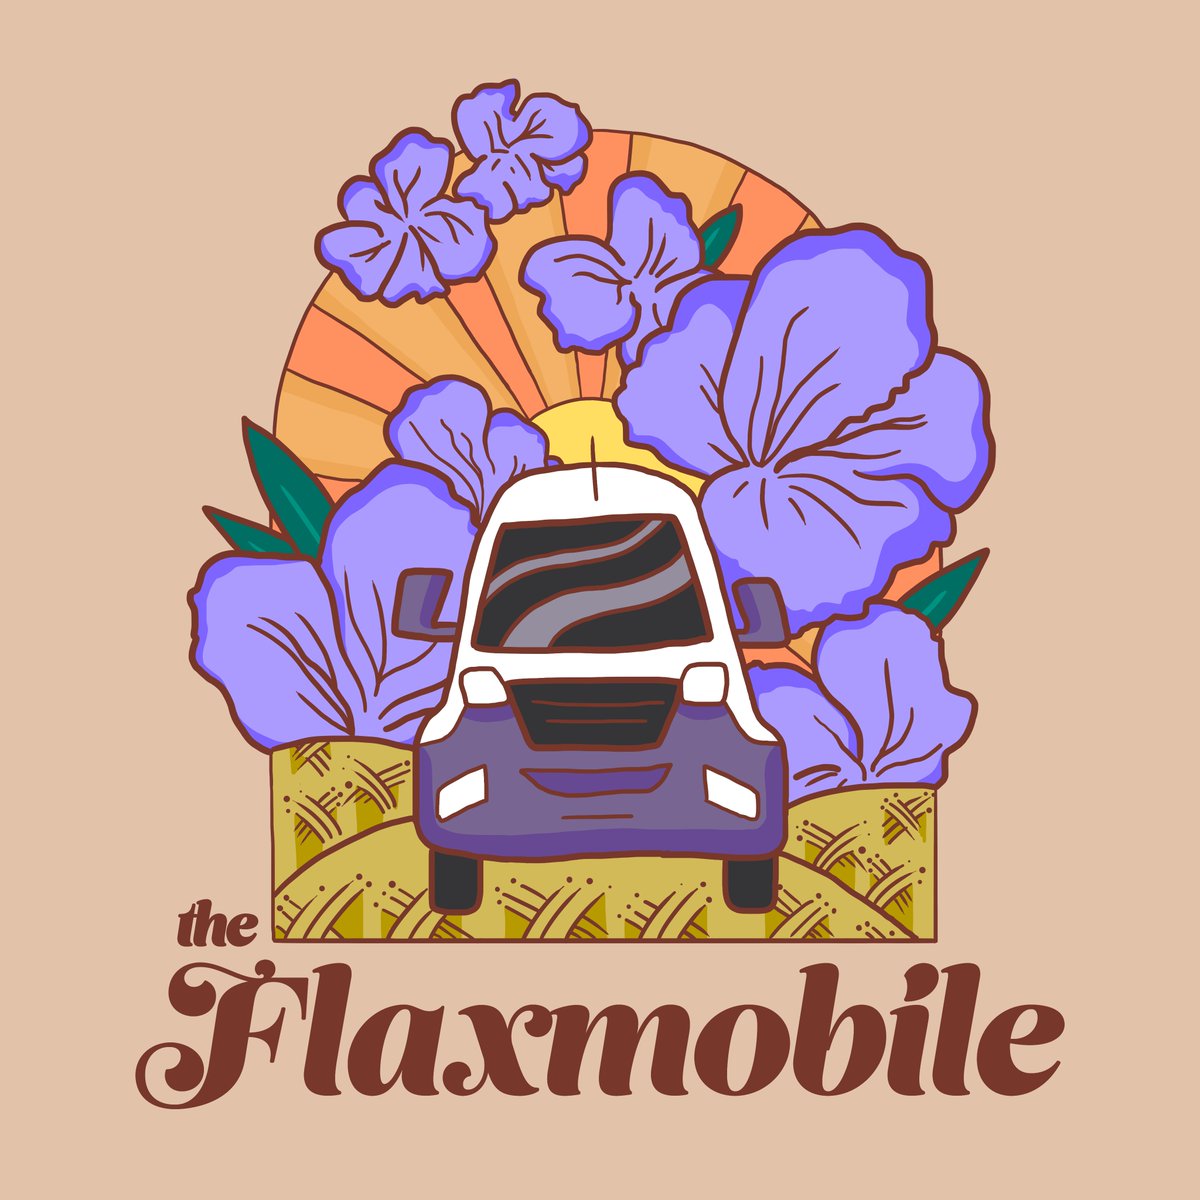 The Flaxmobile Project, an initiative by NSCAD Professor Jennifer Green, is launching this summer!
For more information on the Flaxmobile Project, visit jennifergreentextiles.com.
Logo designed by NSCAD University’s own Amy Crosby, photo by Paul McNeill
#IAMNSCAD #EarthDay